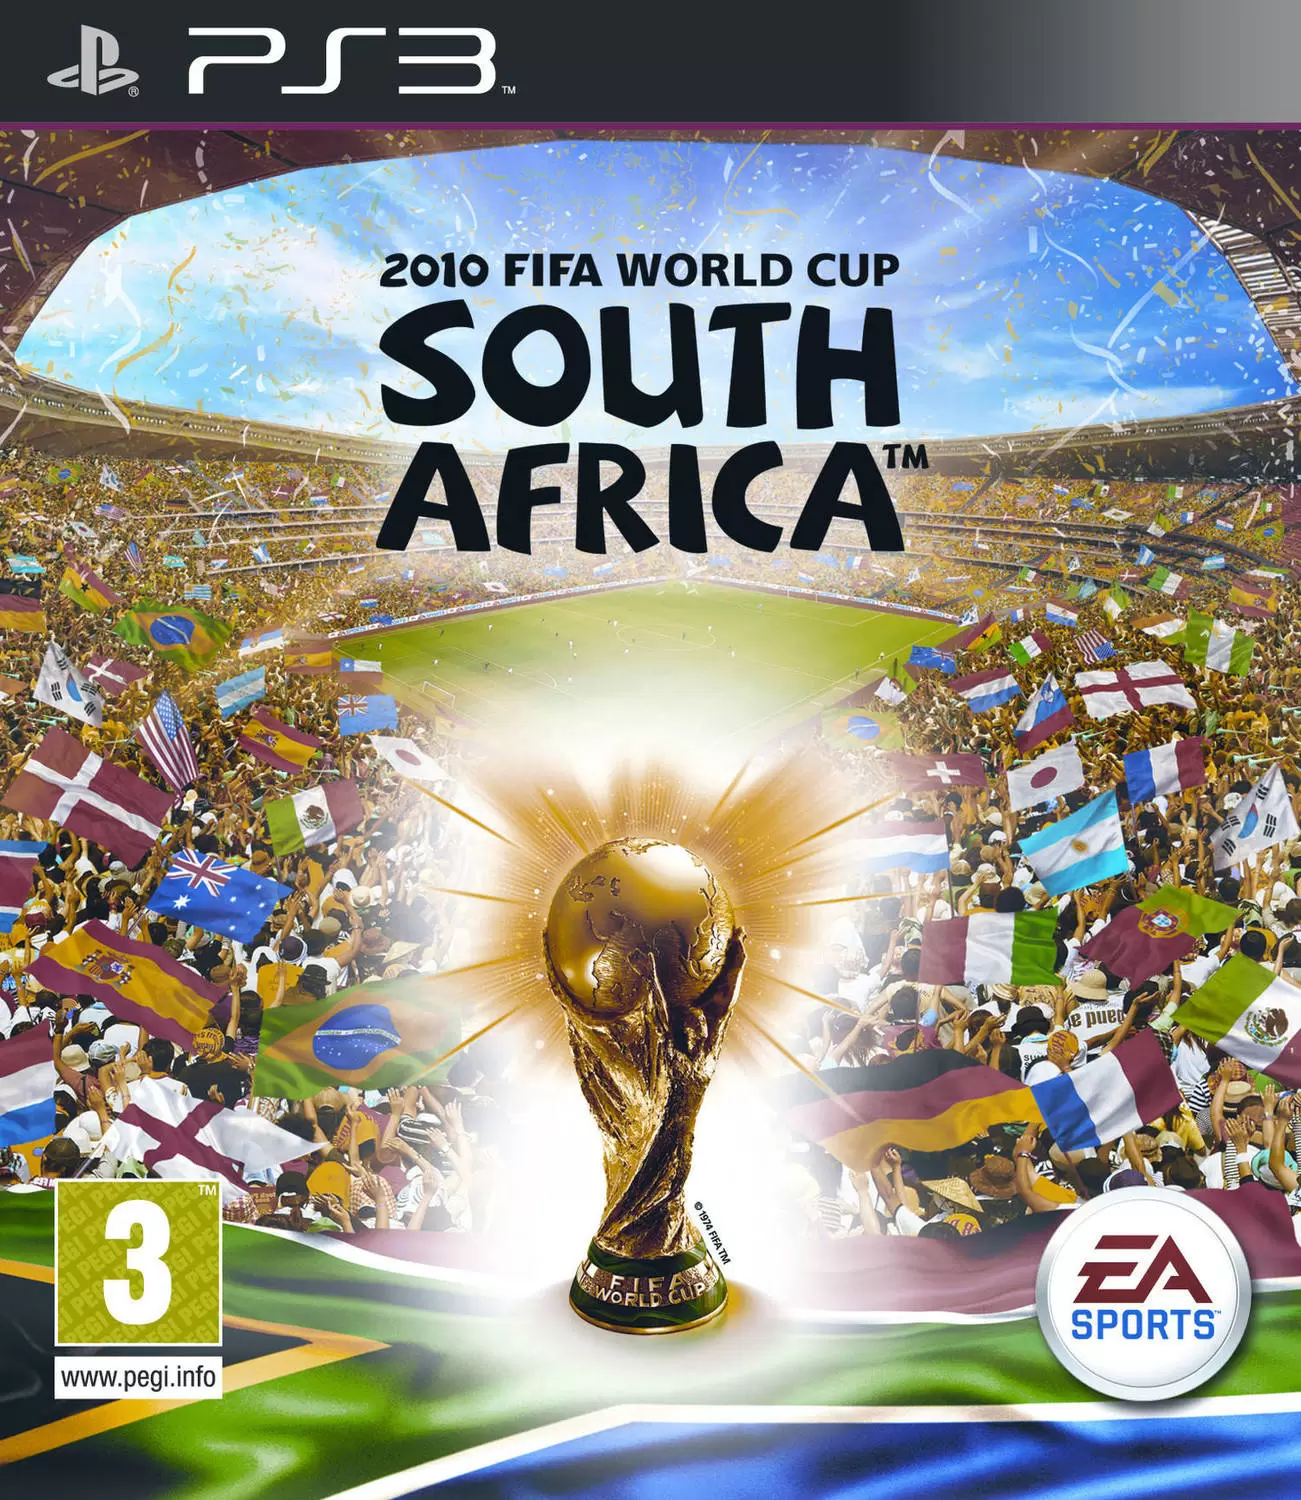 PS3 Games - 2010 FIFA World Cup South Africa